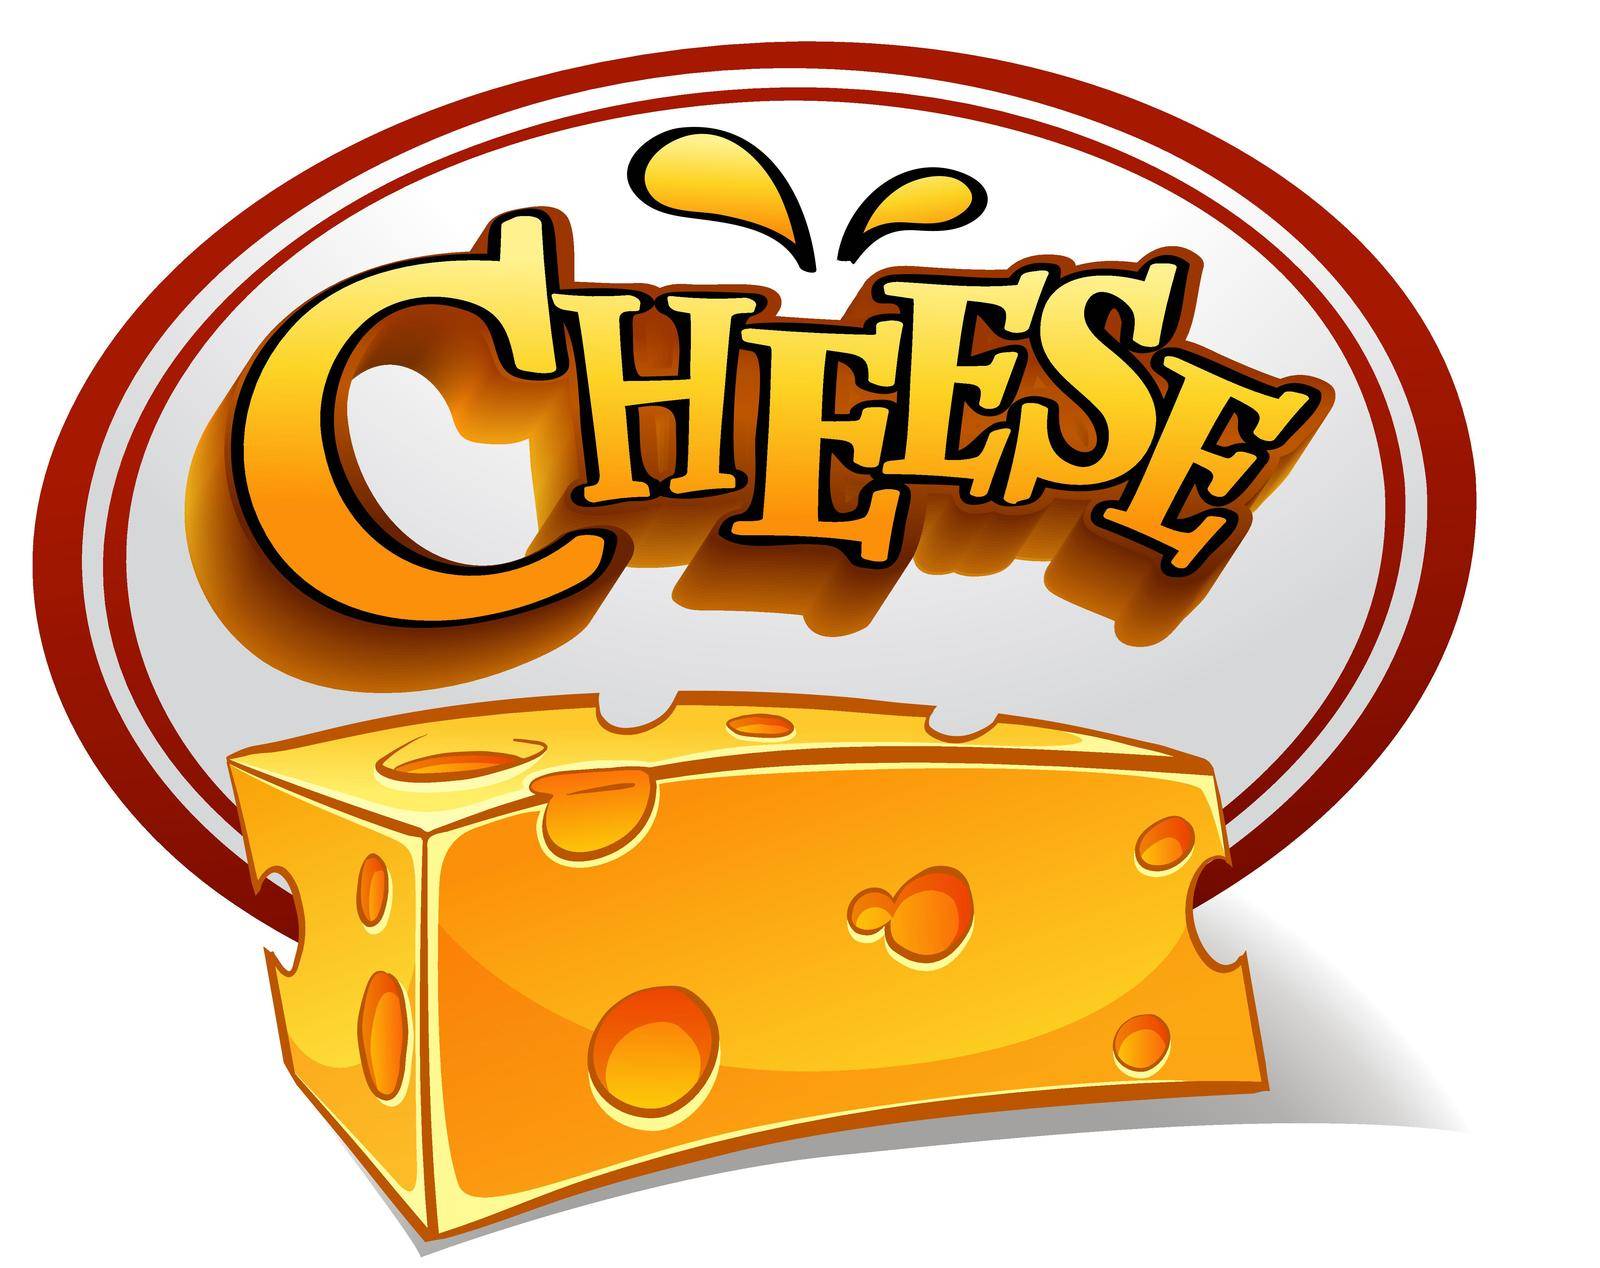 Logo of a cheese on a white background